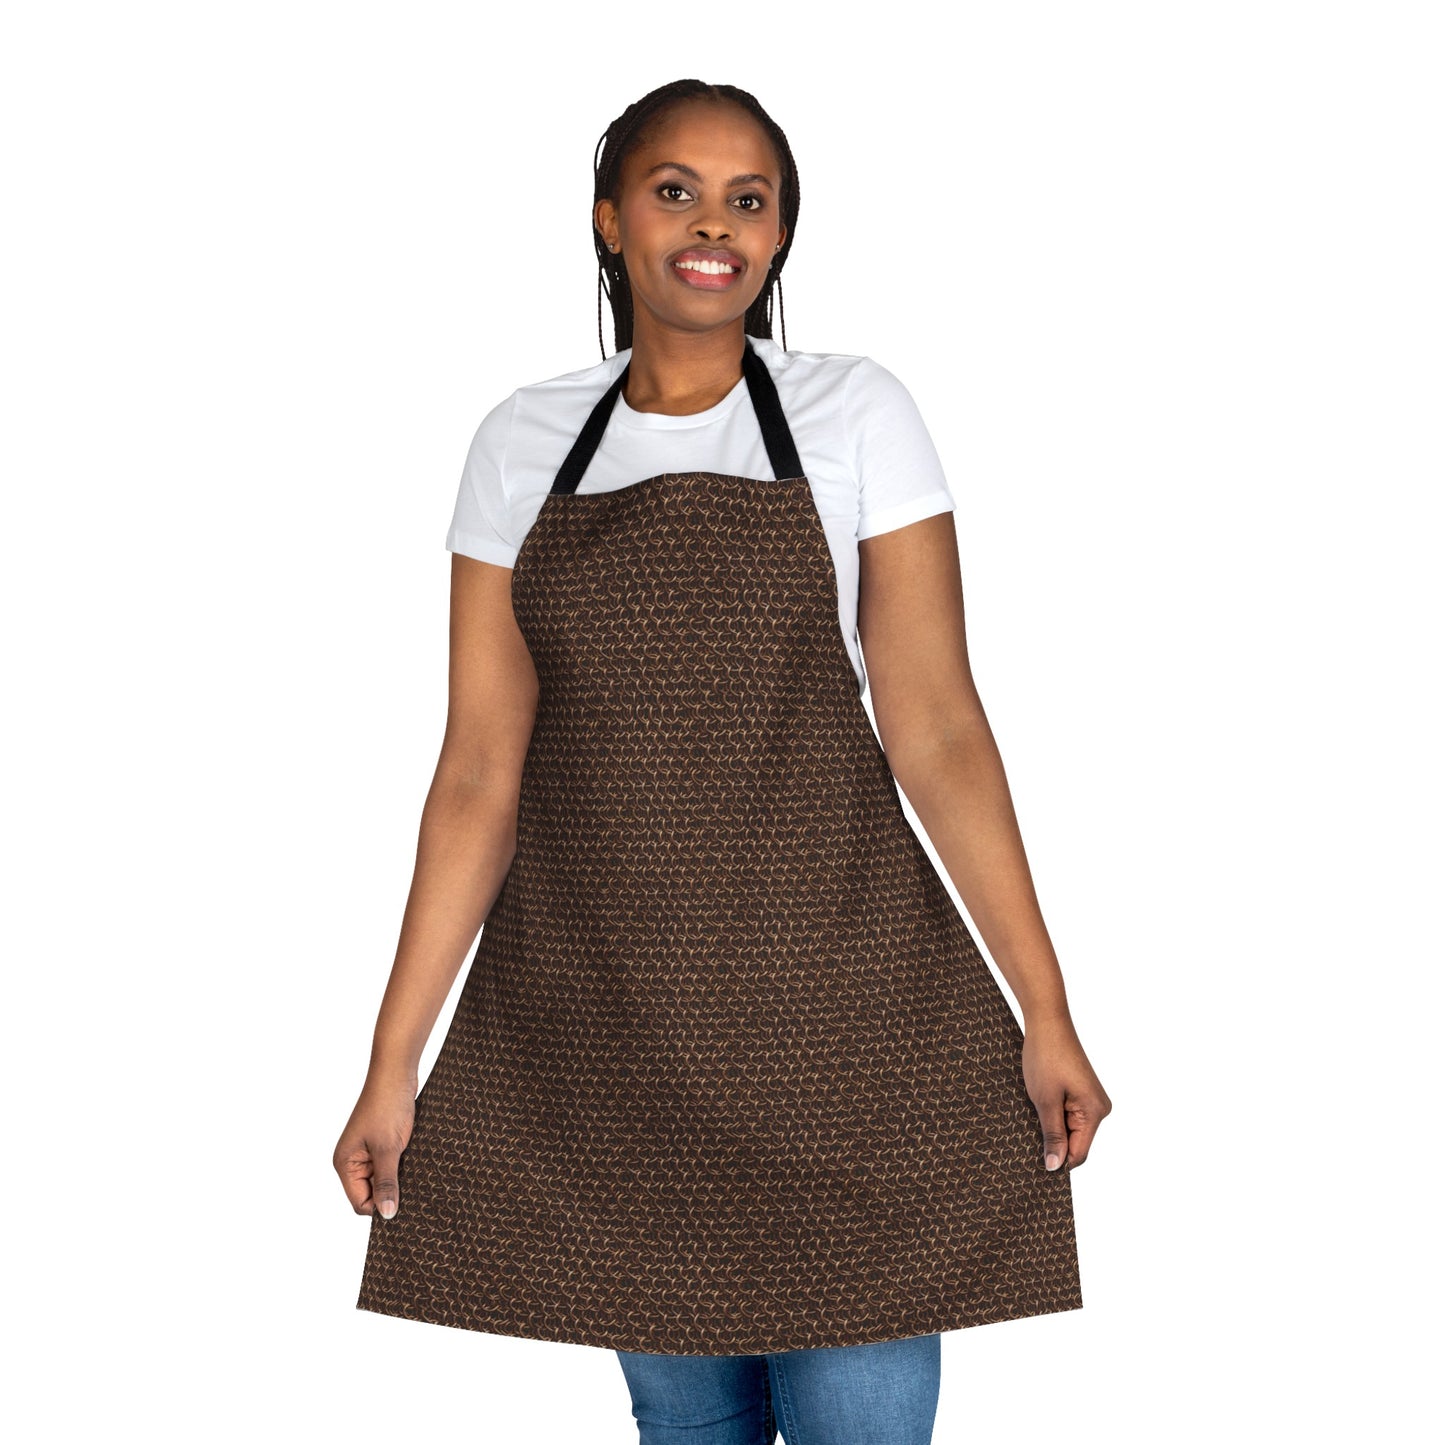 Bronze Chainmail Apron